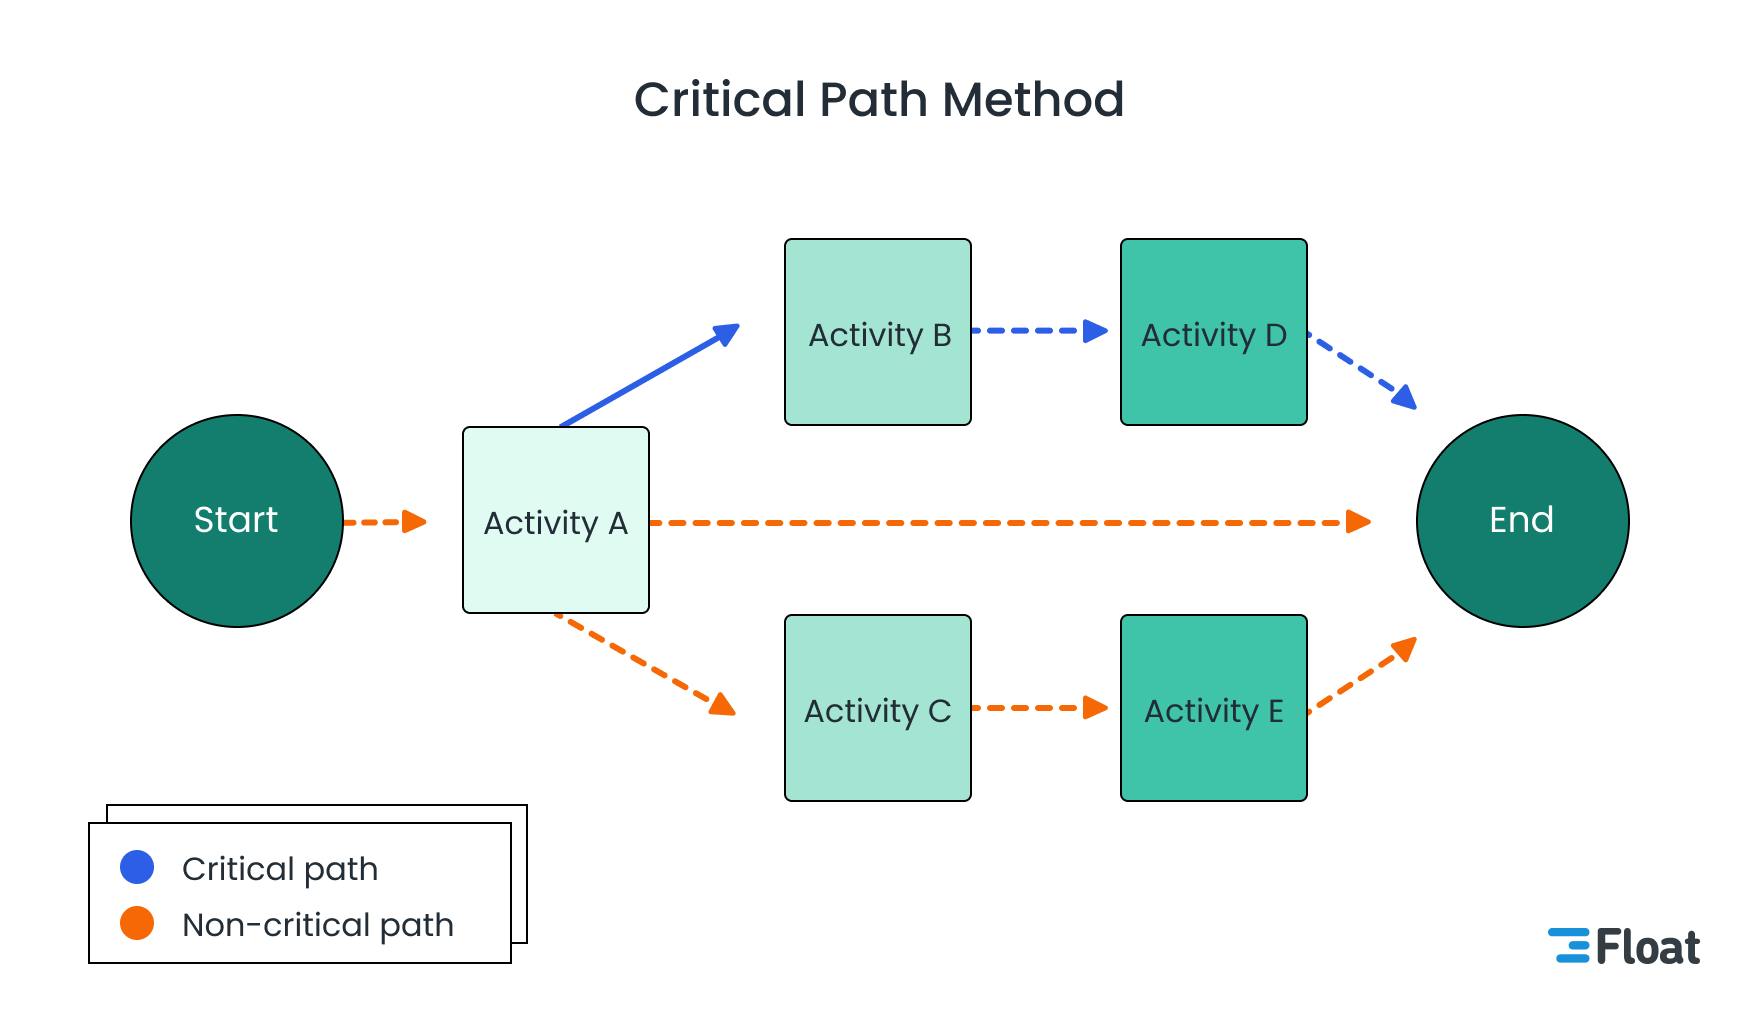 An illustration showing the critical path method